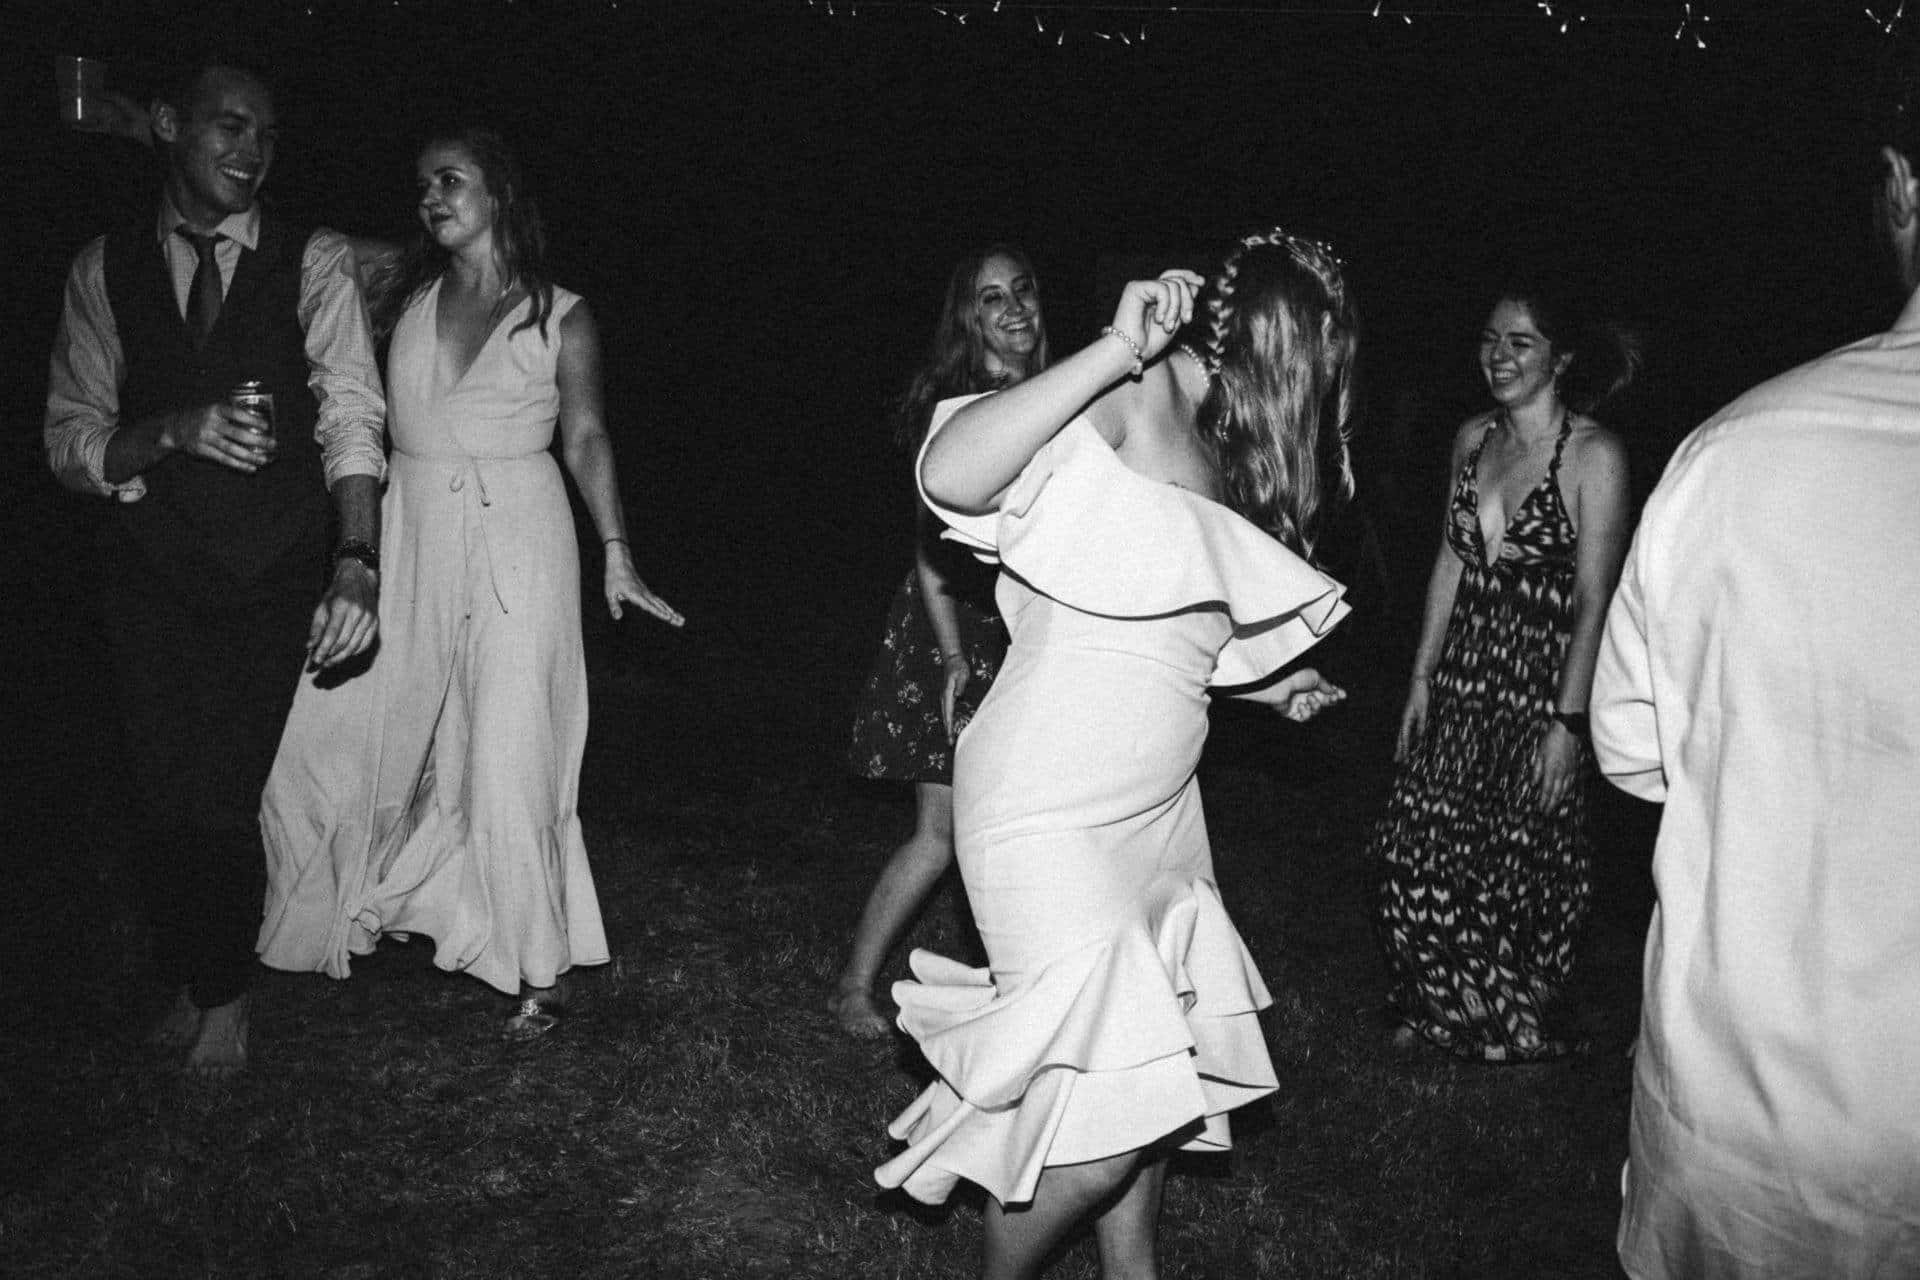 45 People Share Their First Dance Wedding Songs